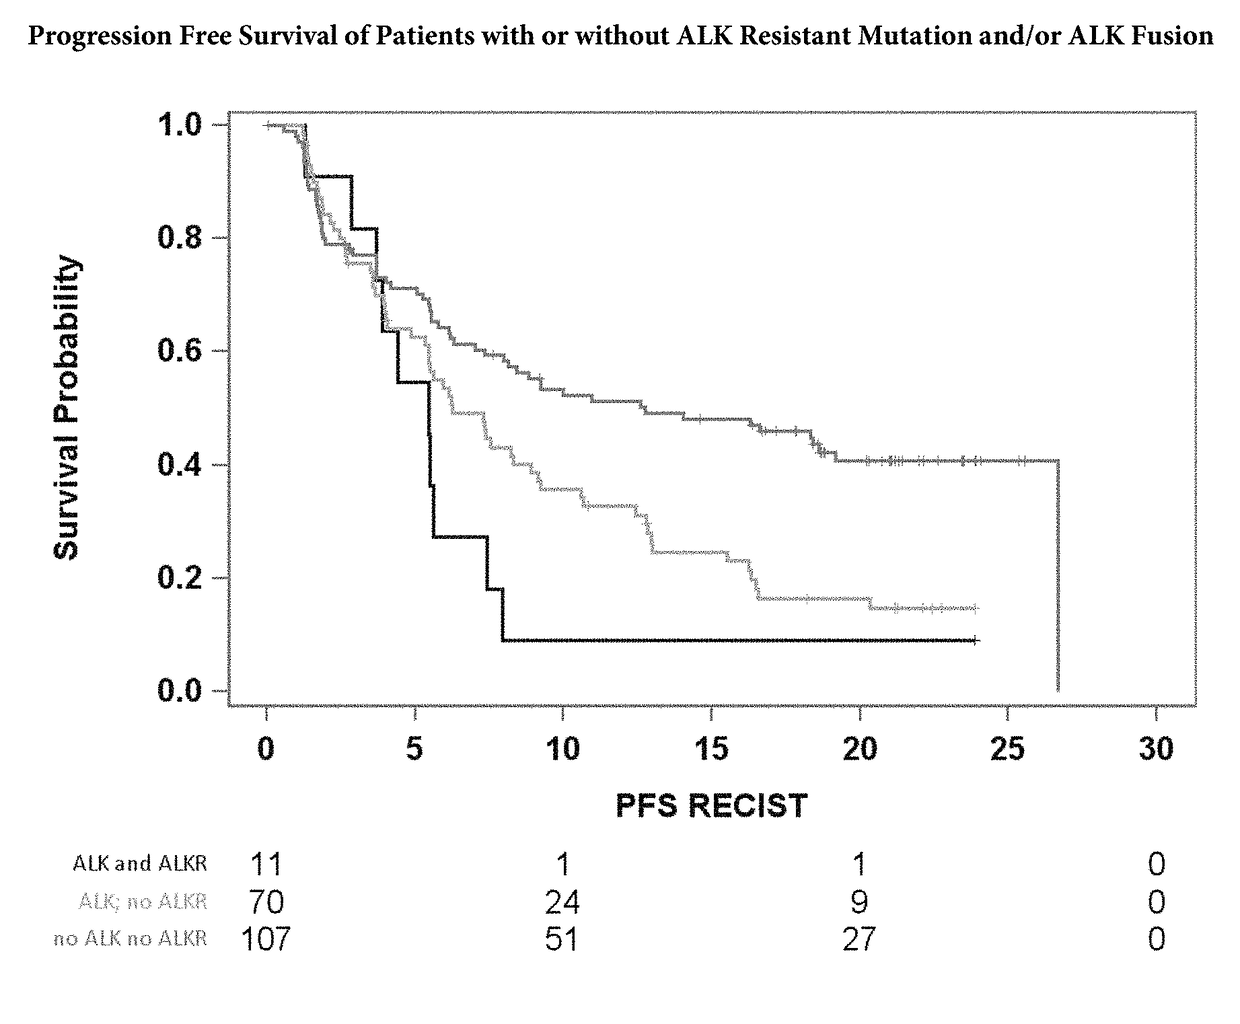 Novel mutations in anaplastic lymphoma kinase predicting response to alk inhibitor therapy in lung cancer patients